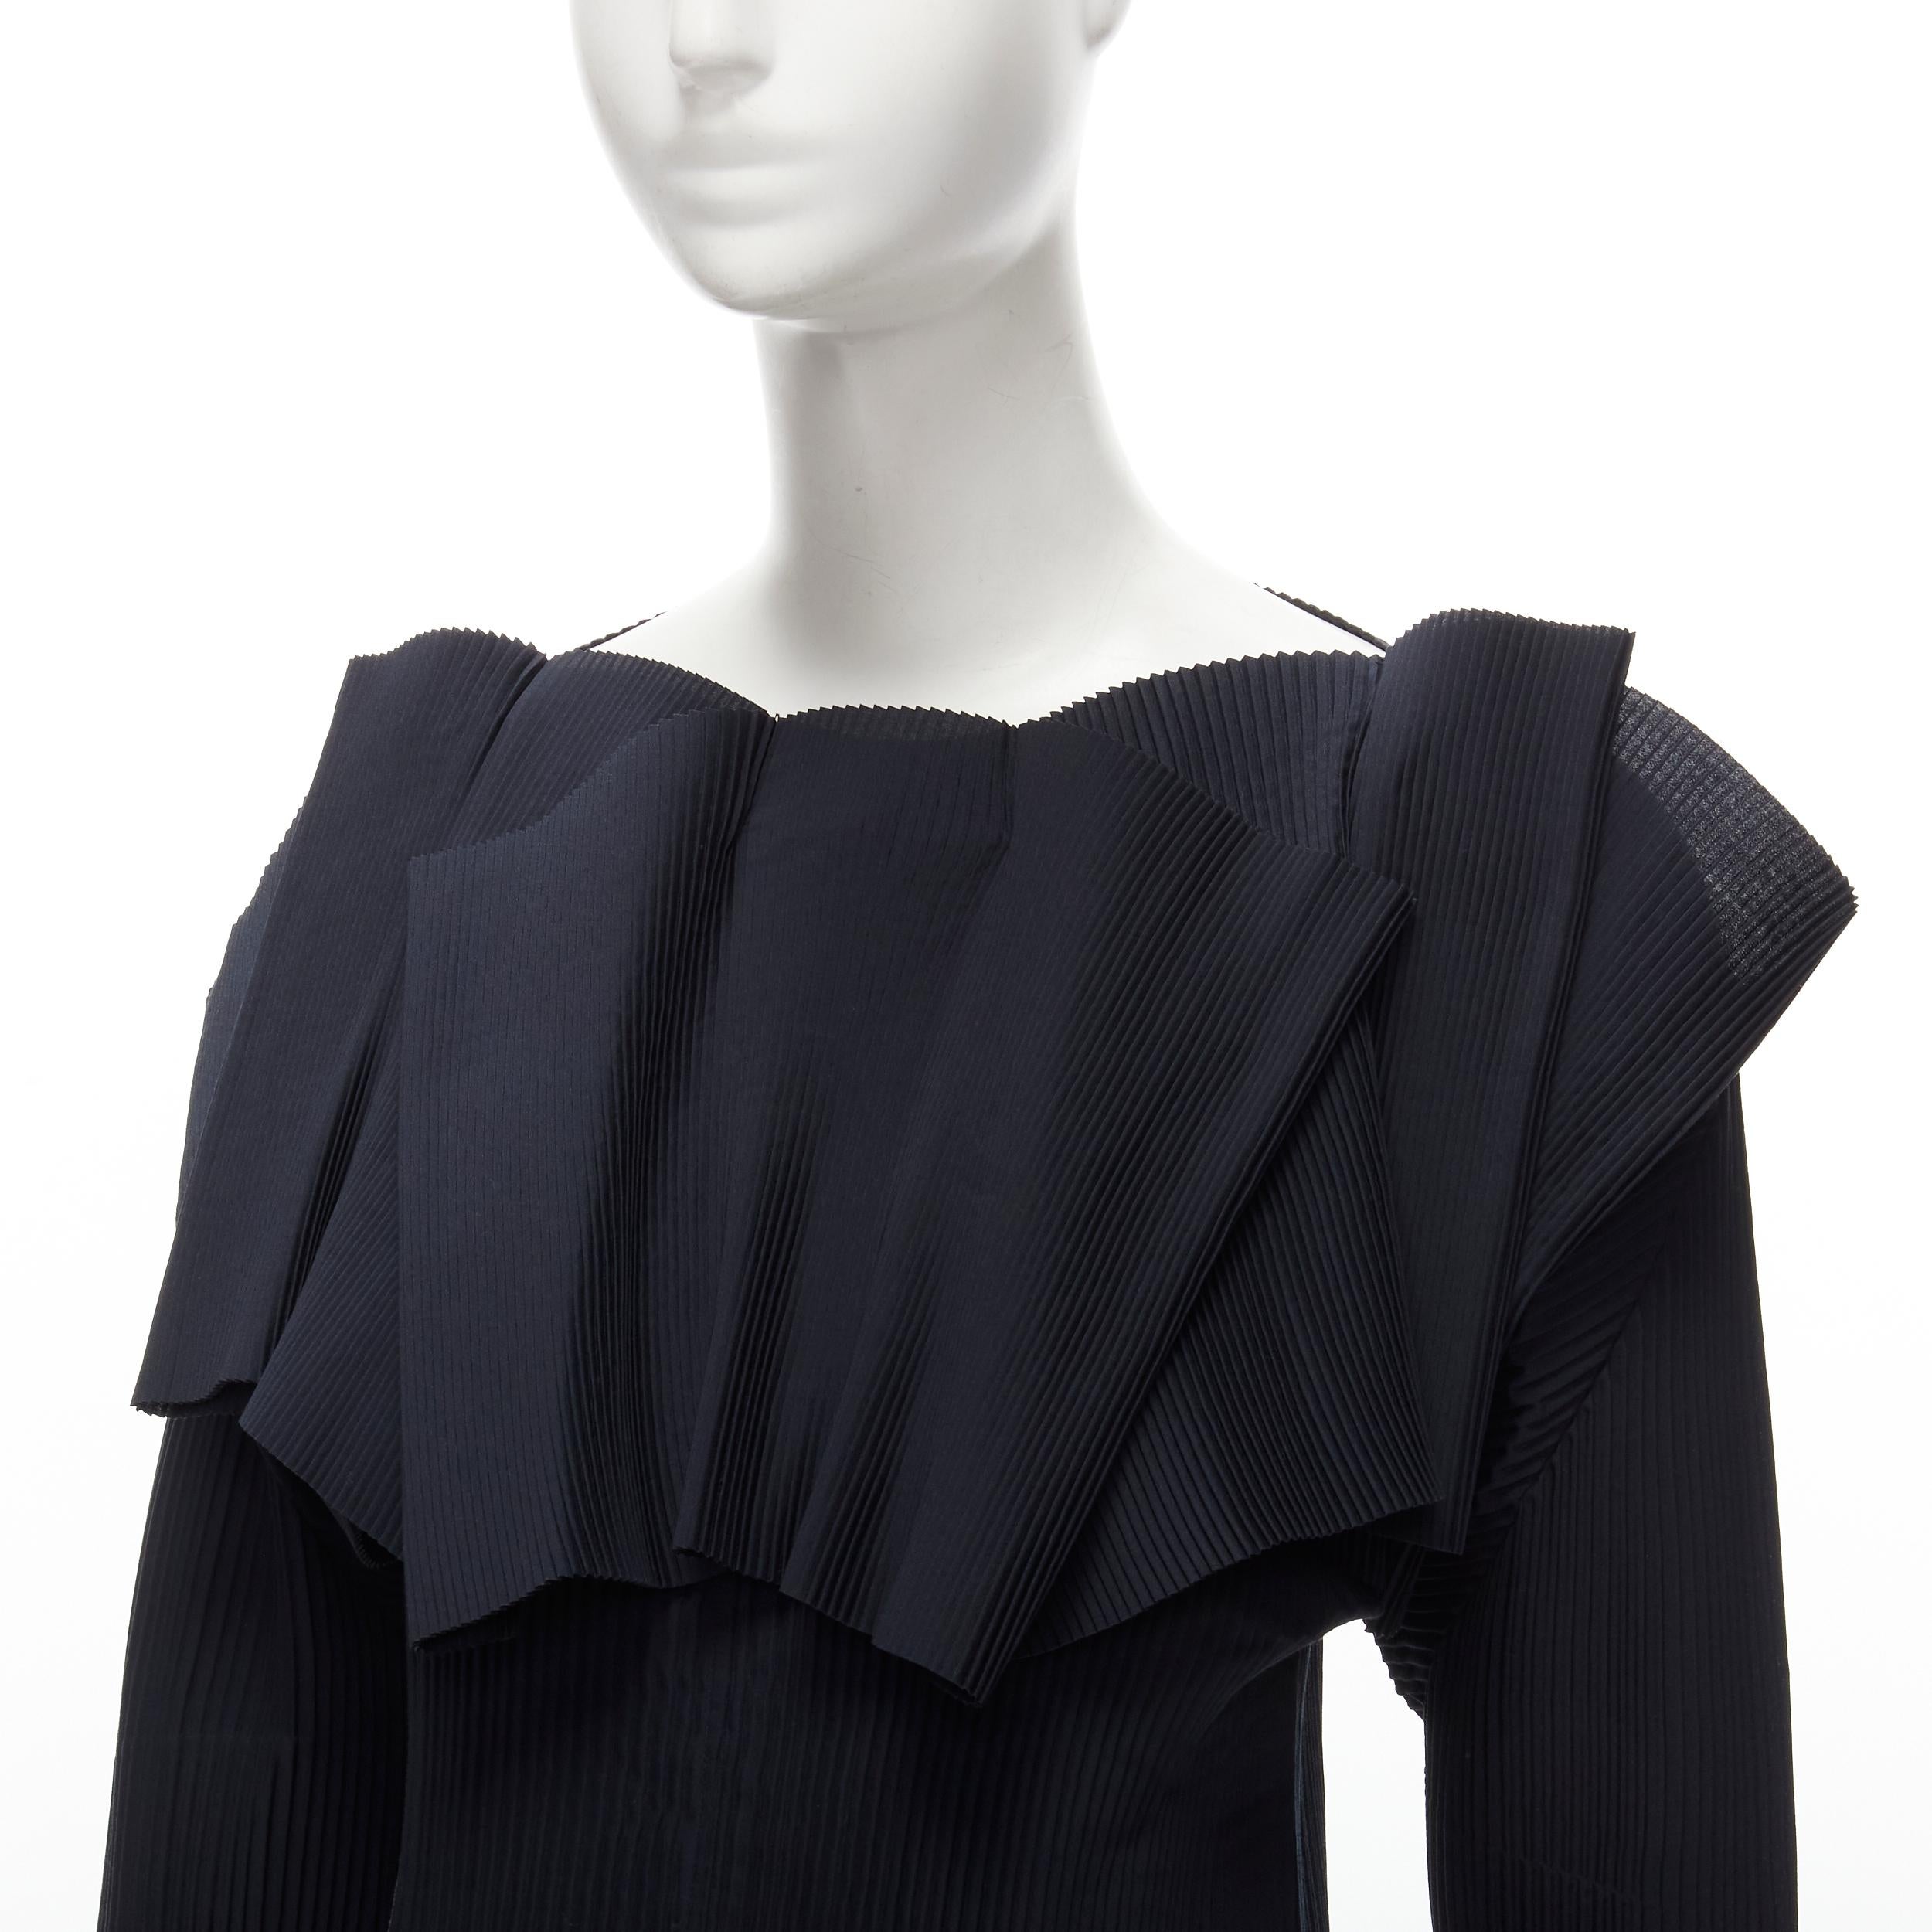 ISSEY MIYAKE plisse pleated black ruffle collar dolman sleeve long sleeve top M
Reference: TGAS/C01707
Brand: Issey Miyake
Material: Polyester
Color: Black
Pattern: Solid
Closure: Elasticated
Made in: Japan

CONDITION:
Condition: Excellent, this